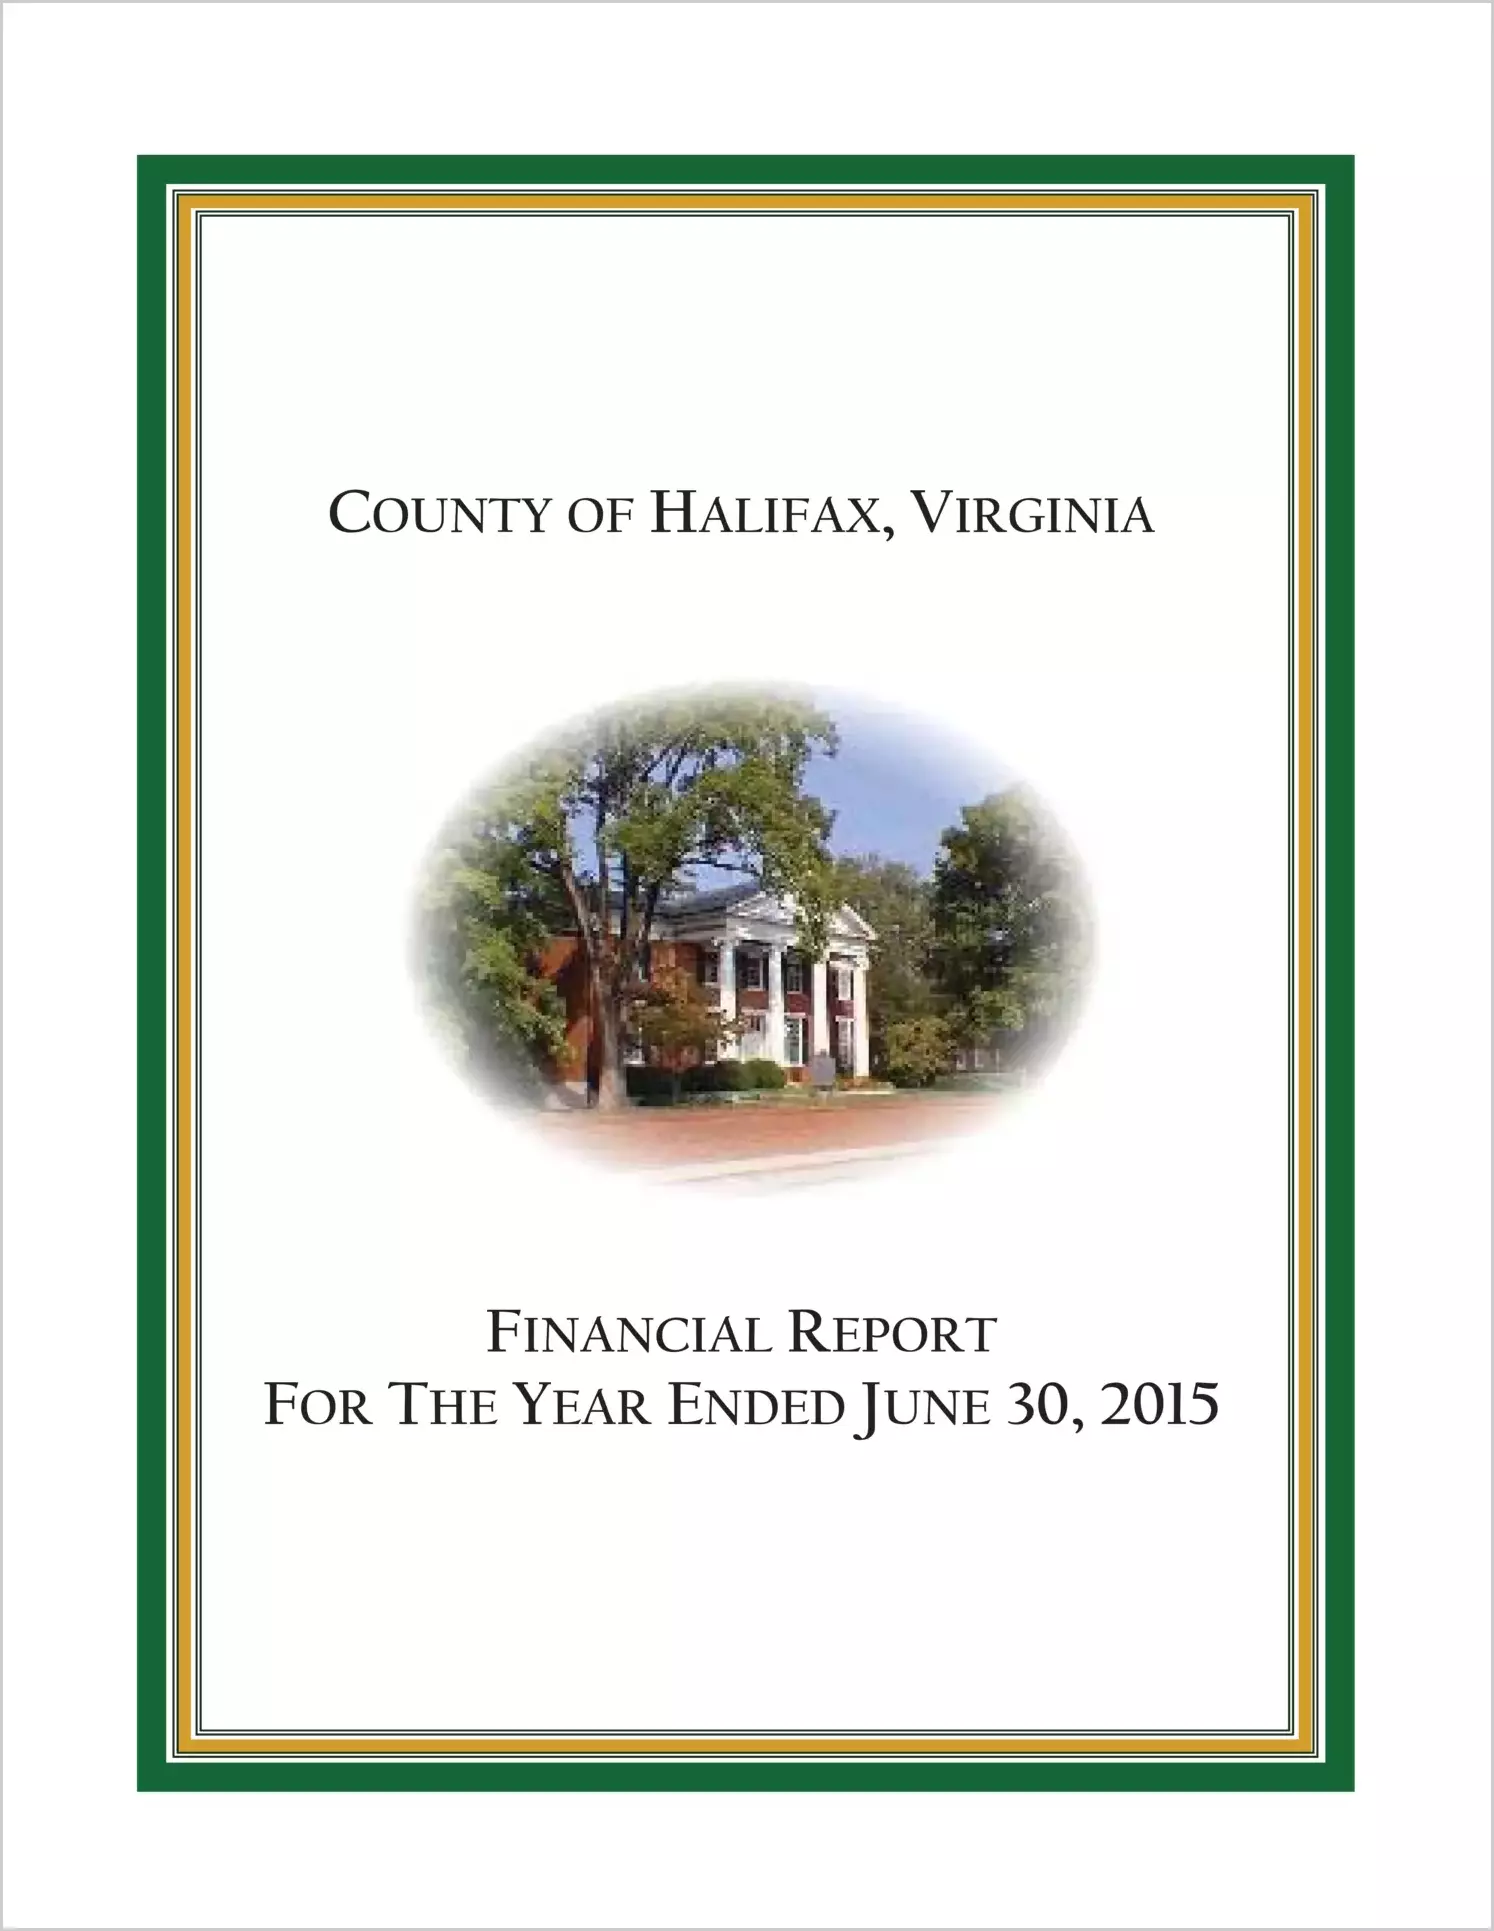 2015 Annual Financial Report for County of Halifax